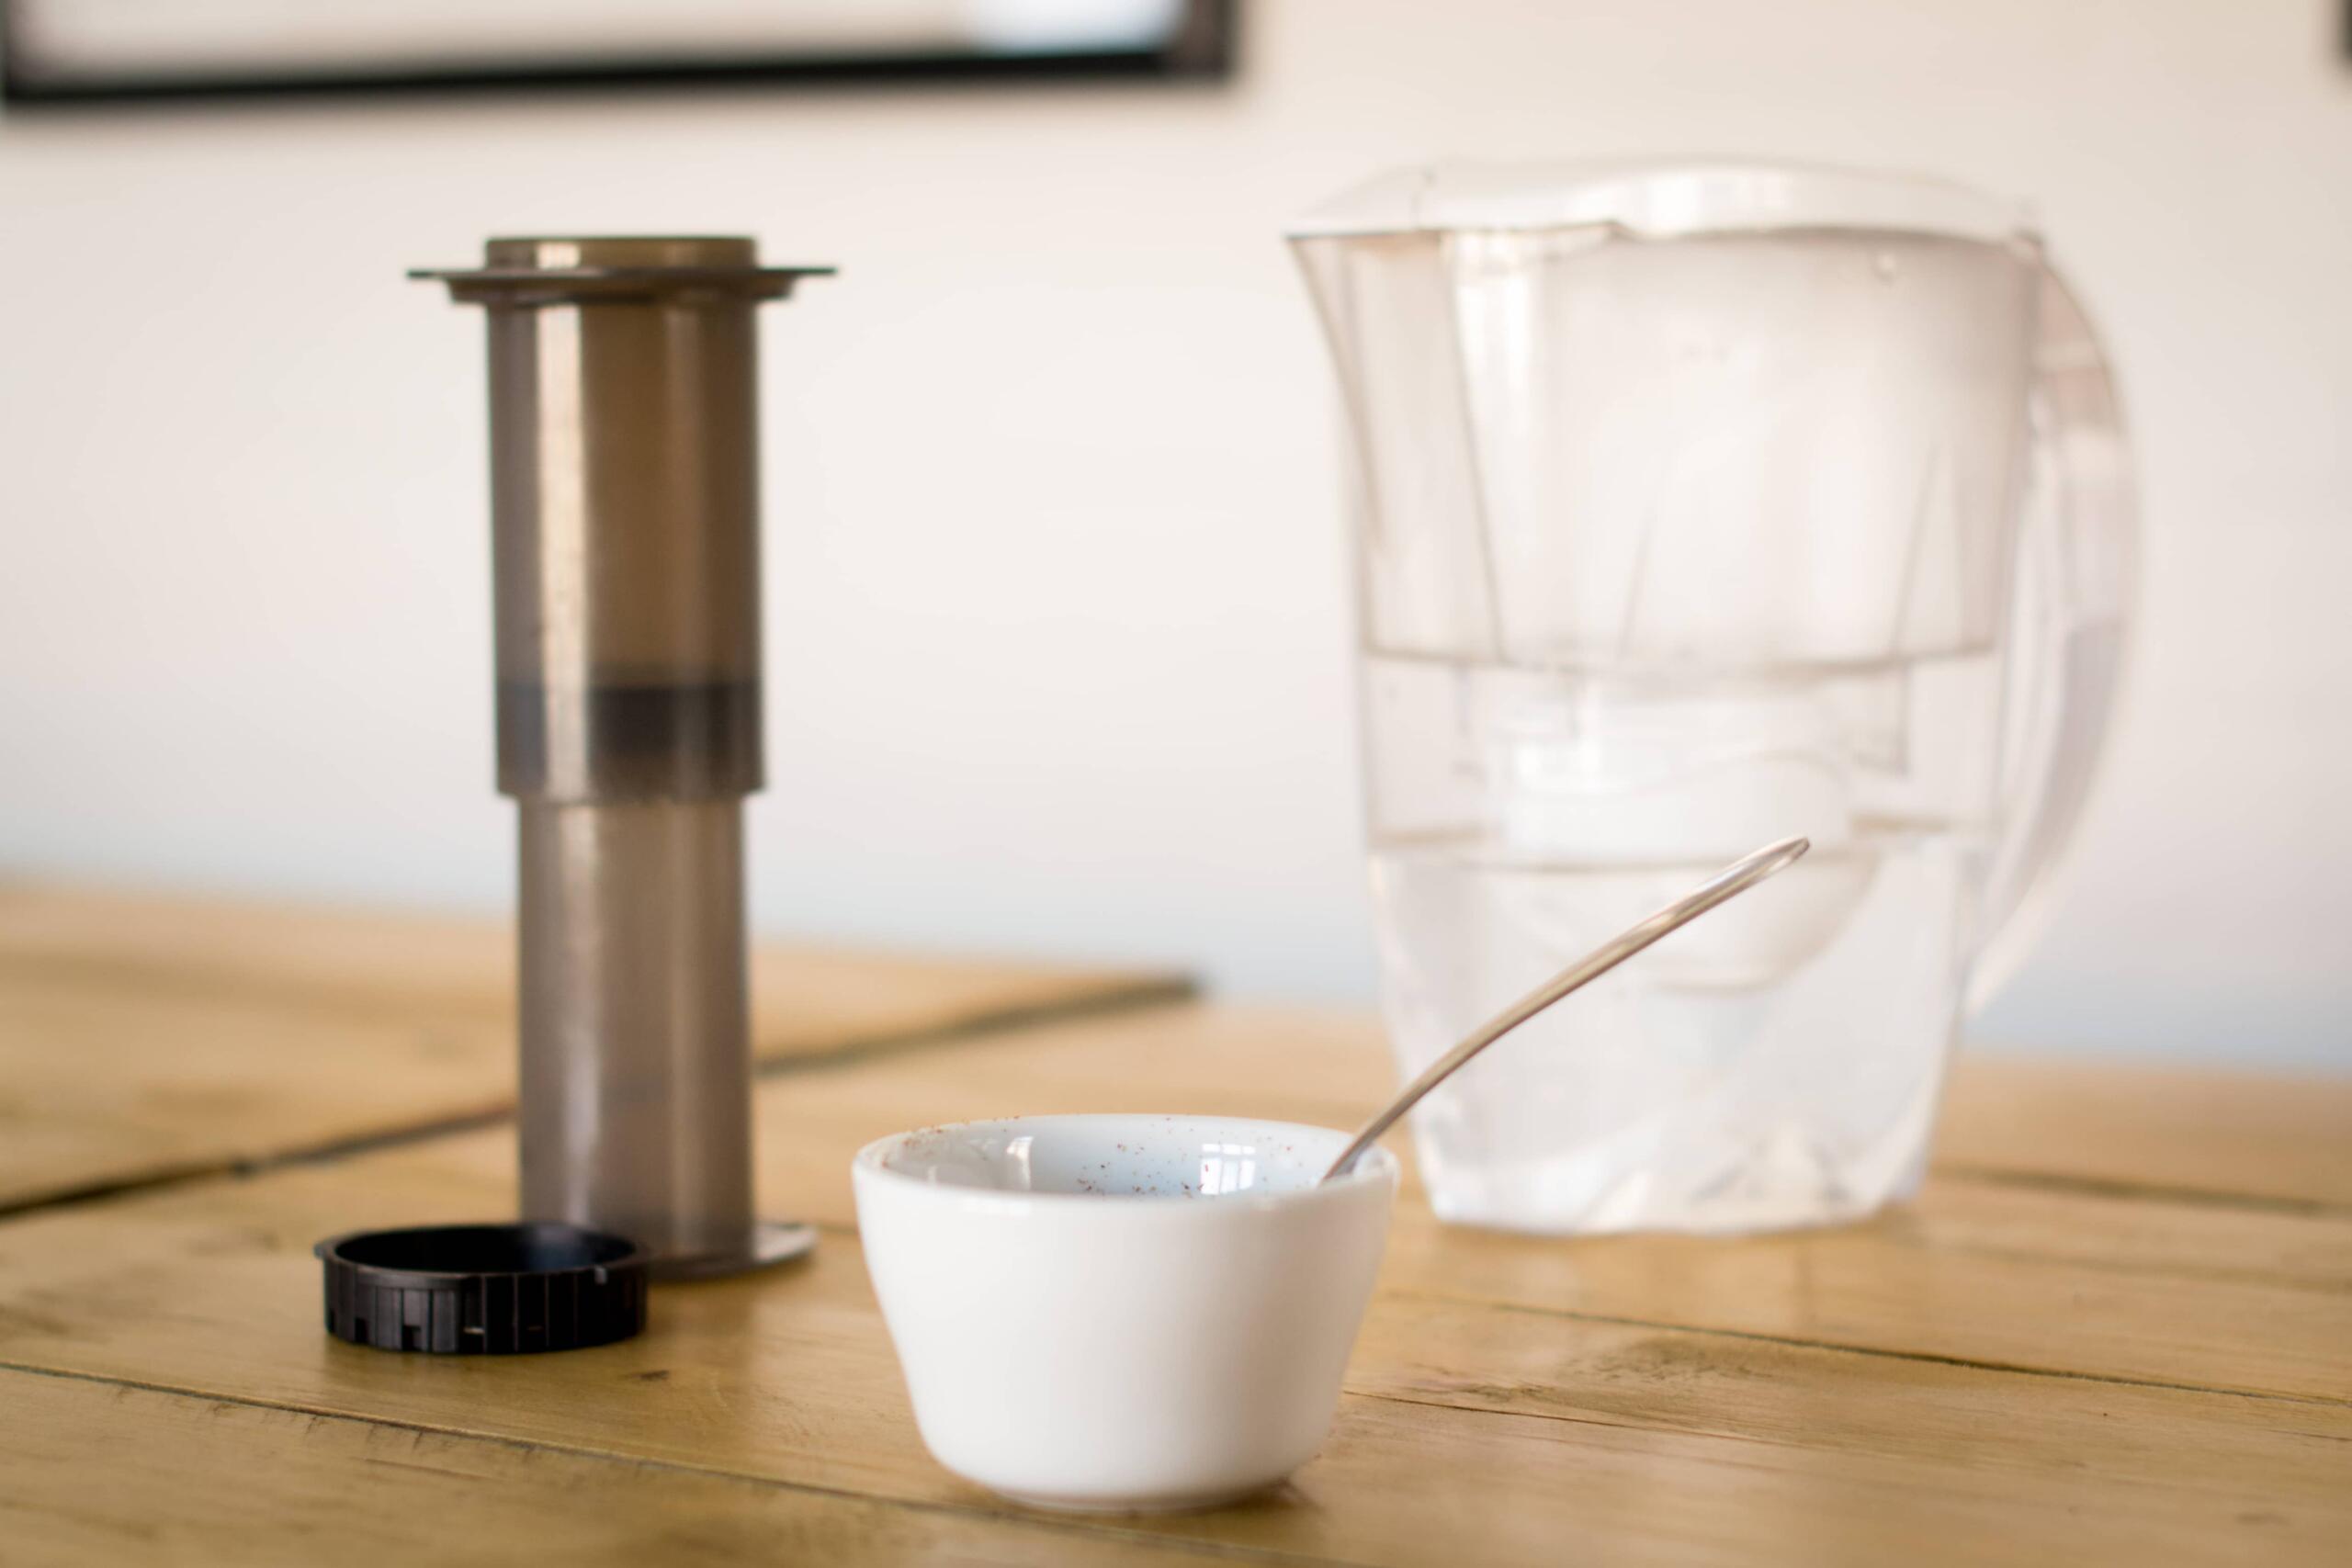 Brita water filter on a table with AeroPress and white bowl of coffee 